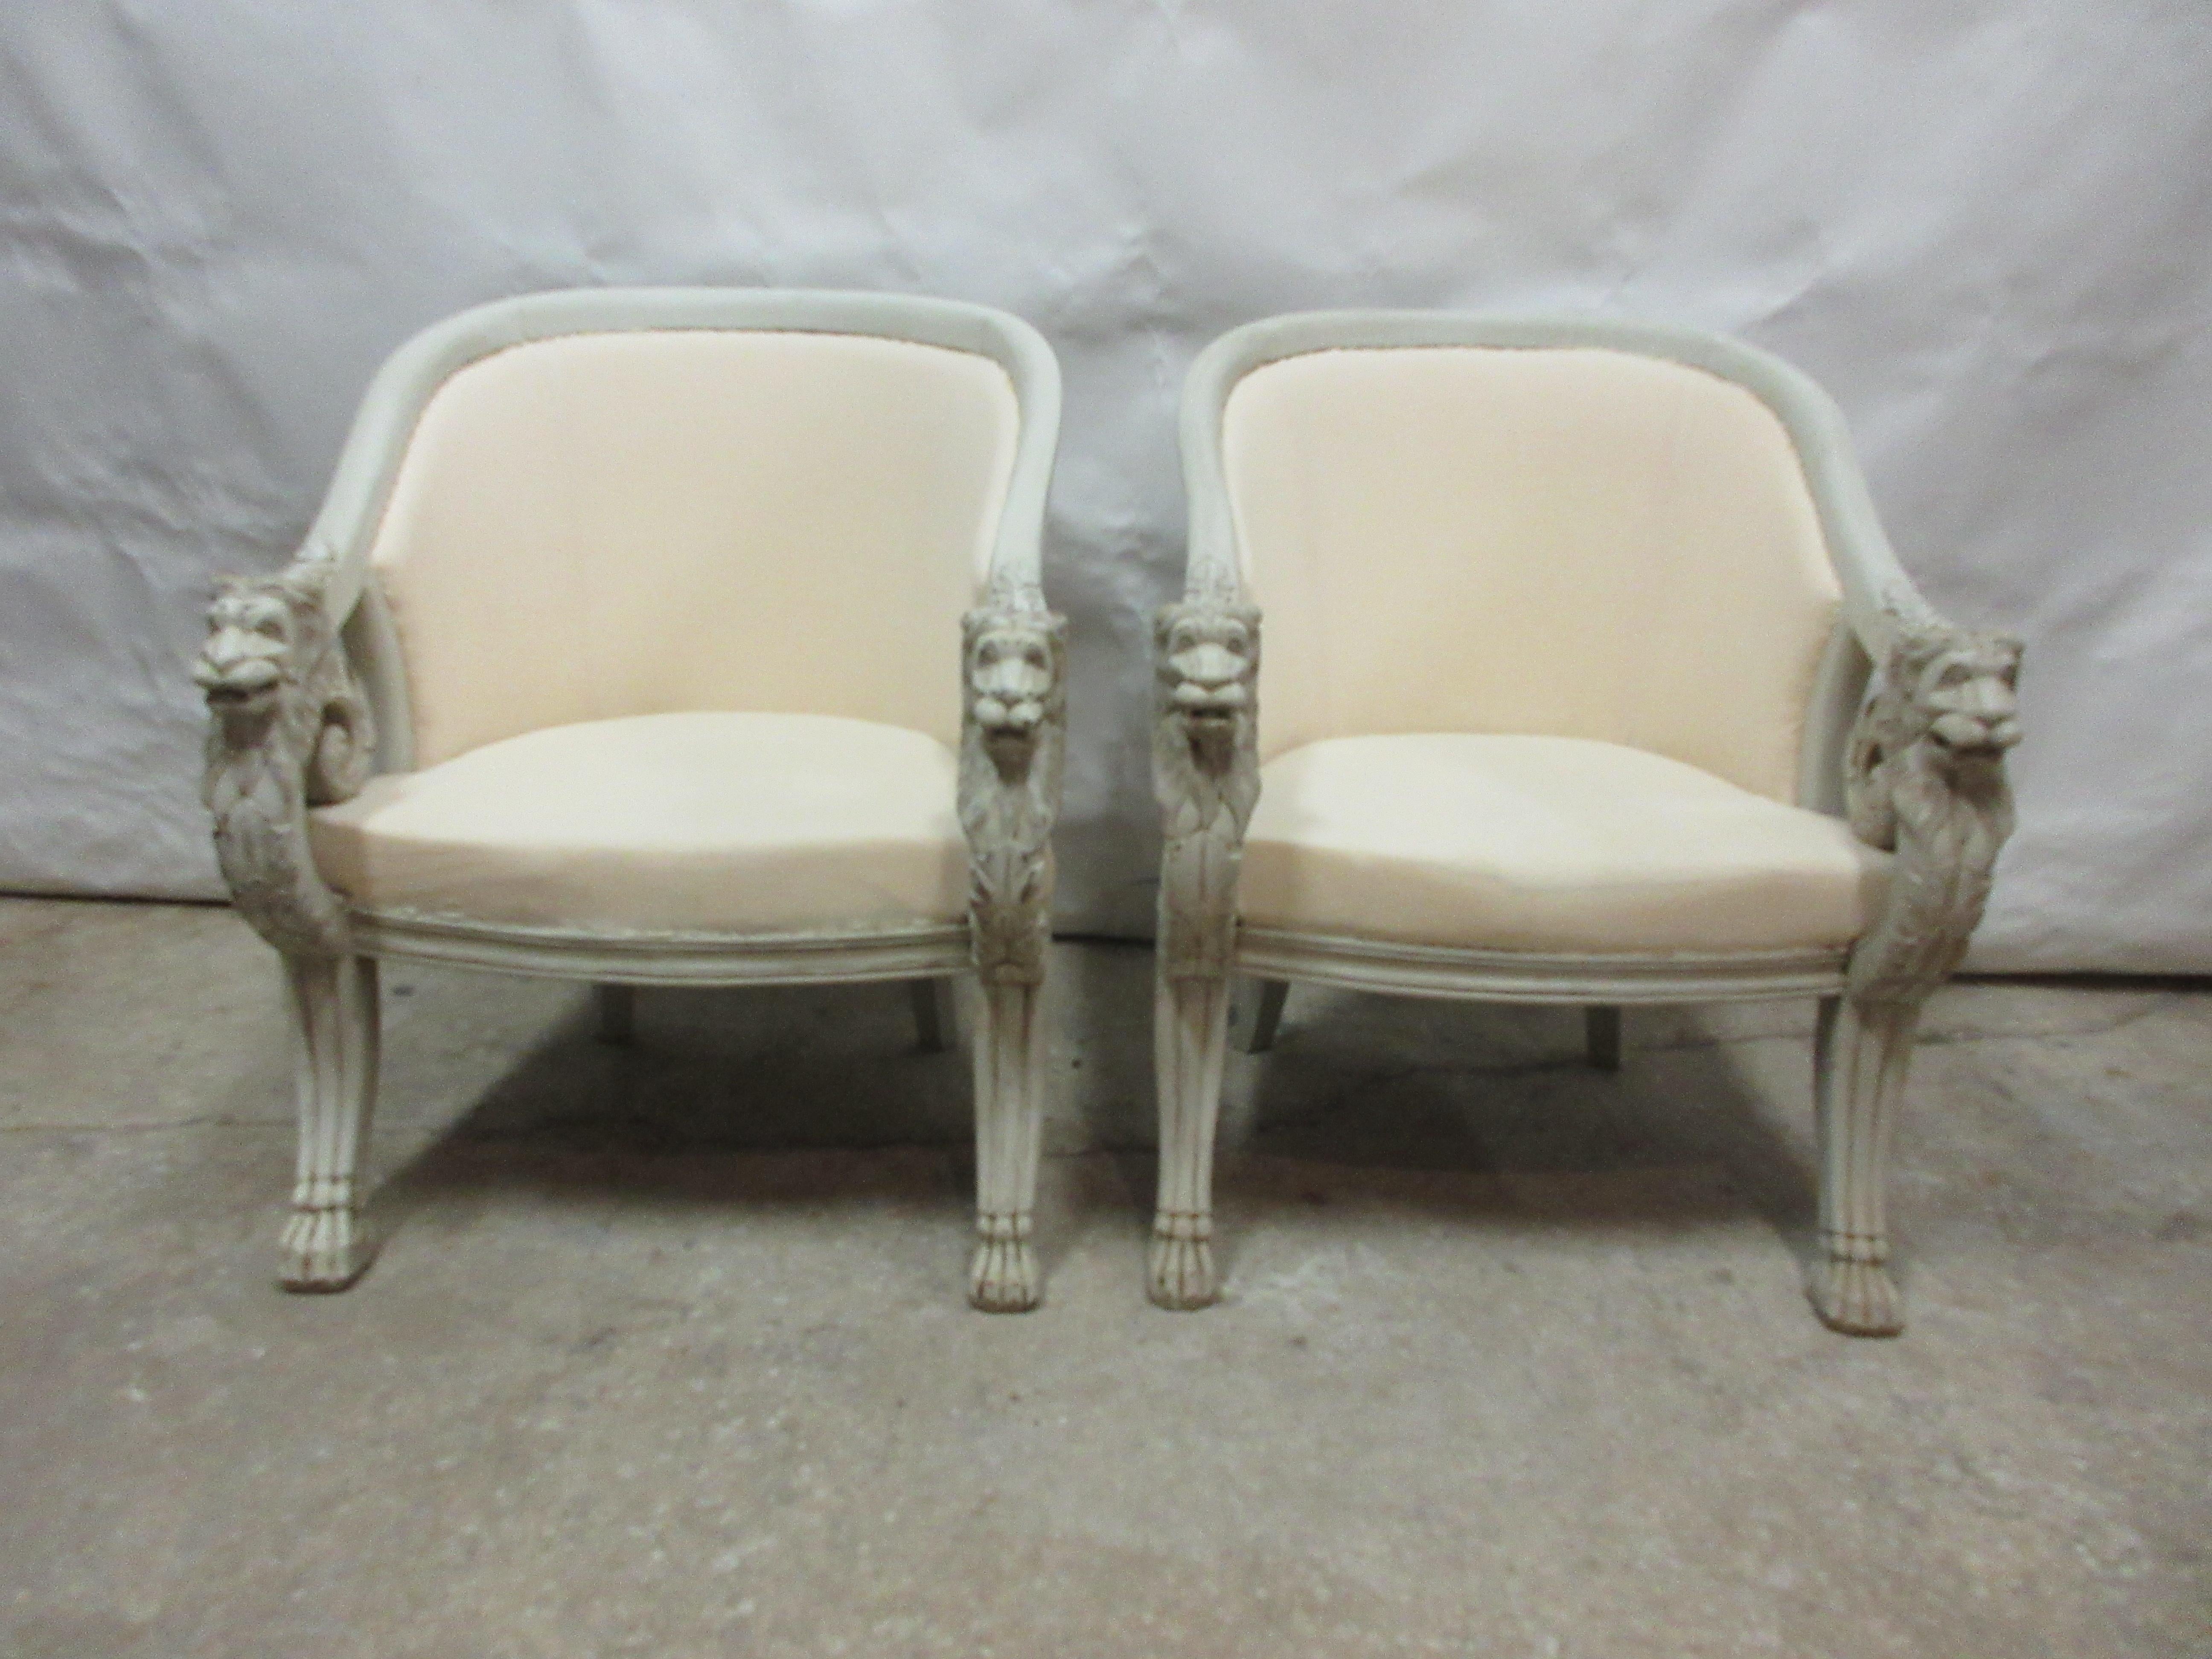 This is a unique set of 2 Lions head berger chairs, they have been restored and repainted with Milk Paints 